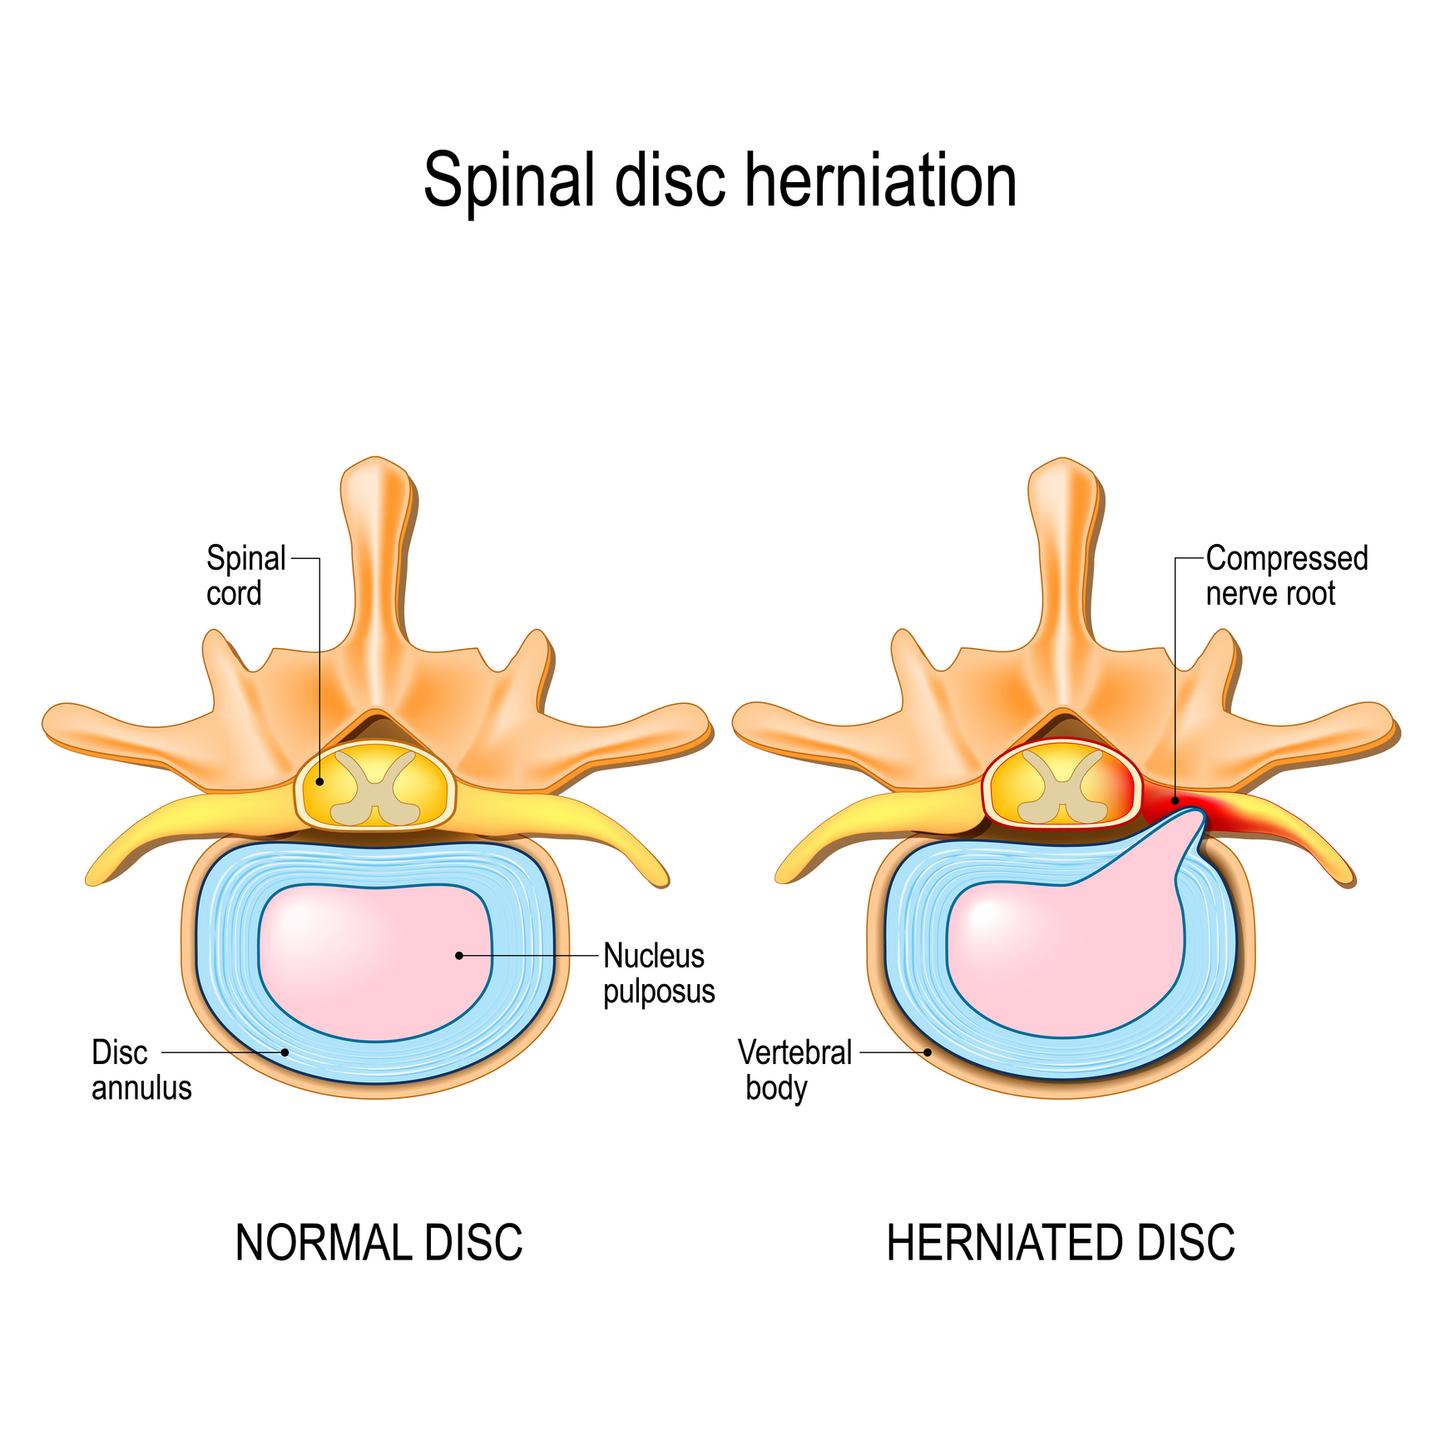 ISSA, International Sports Sciences Association, Certified Personal Trainer, ISSAonline, Personal Trainer's Guide: Exercising After a Herniated Disc